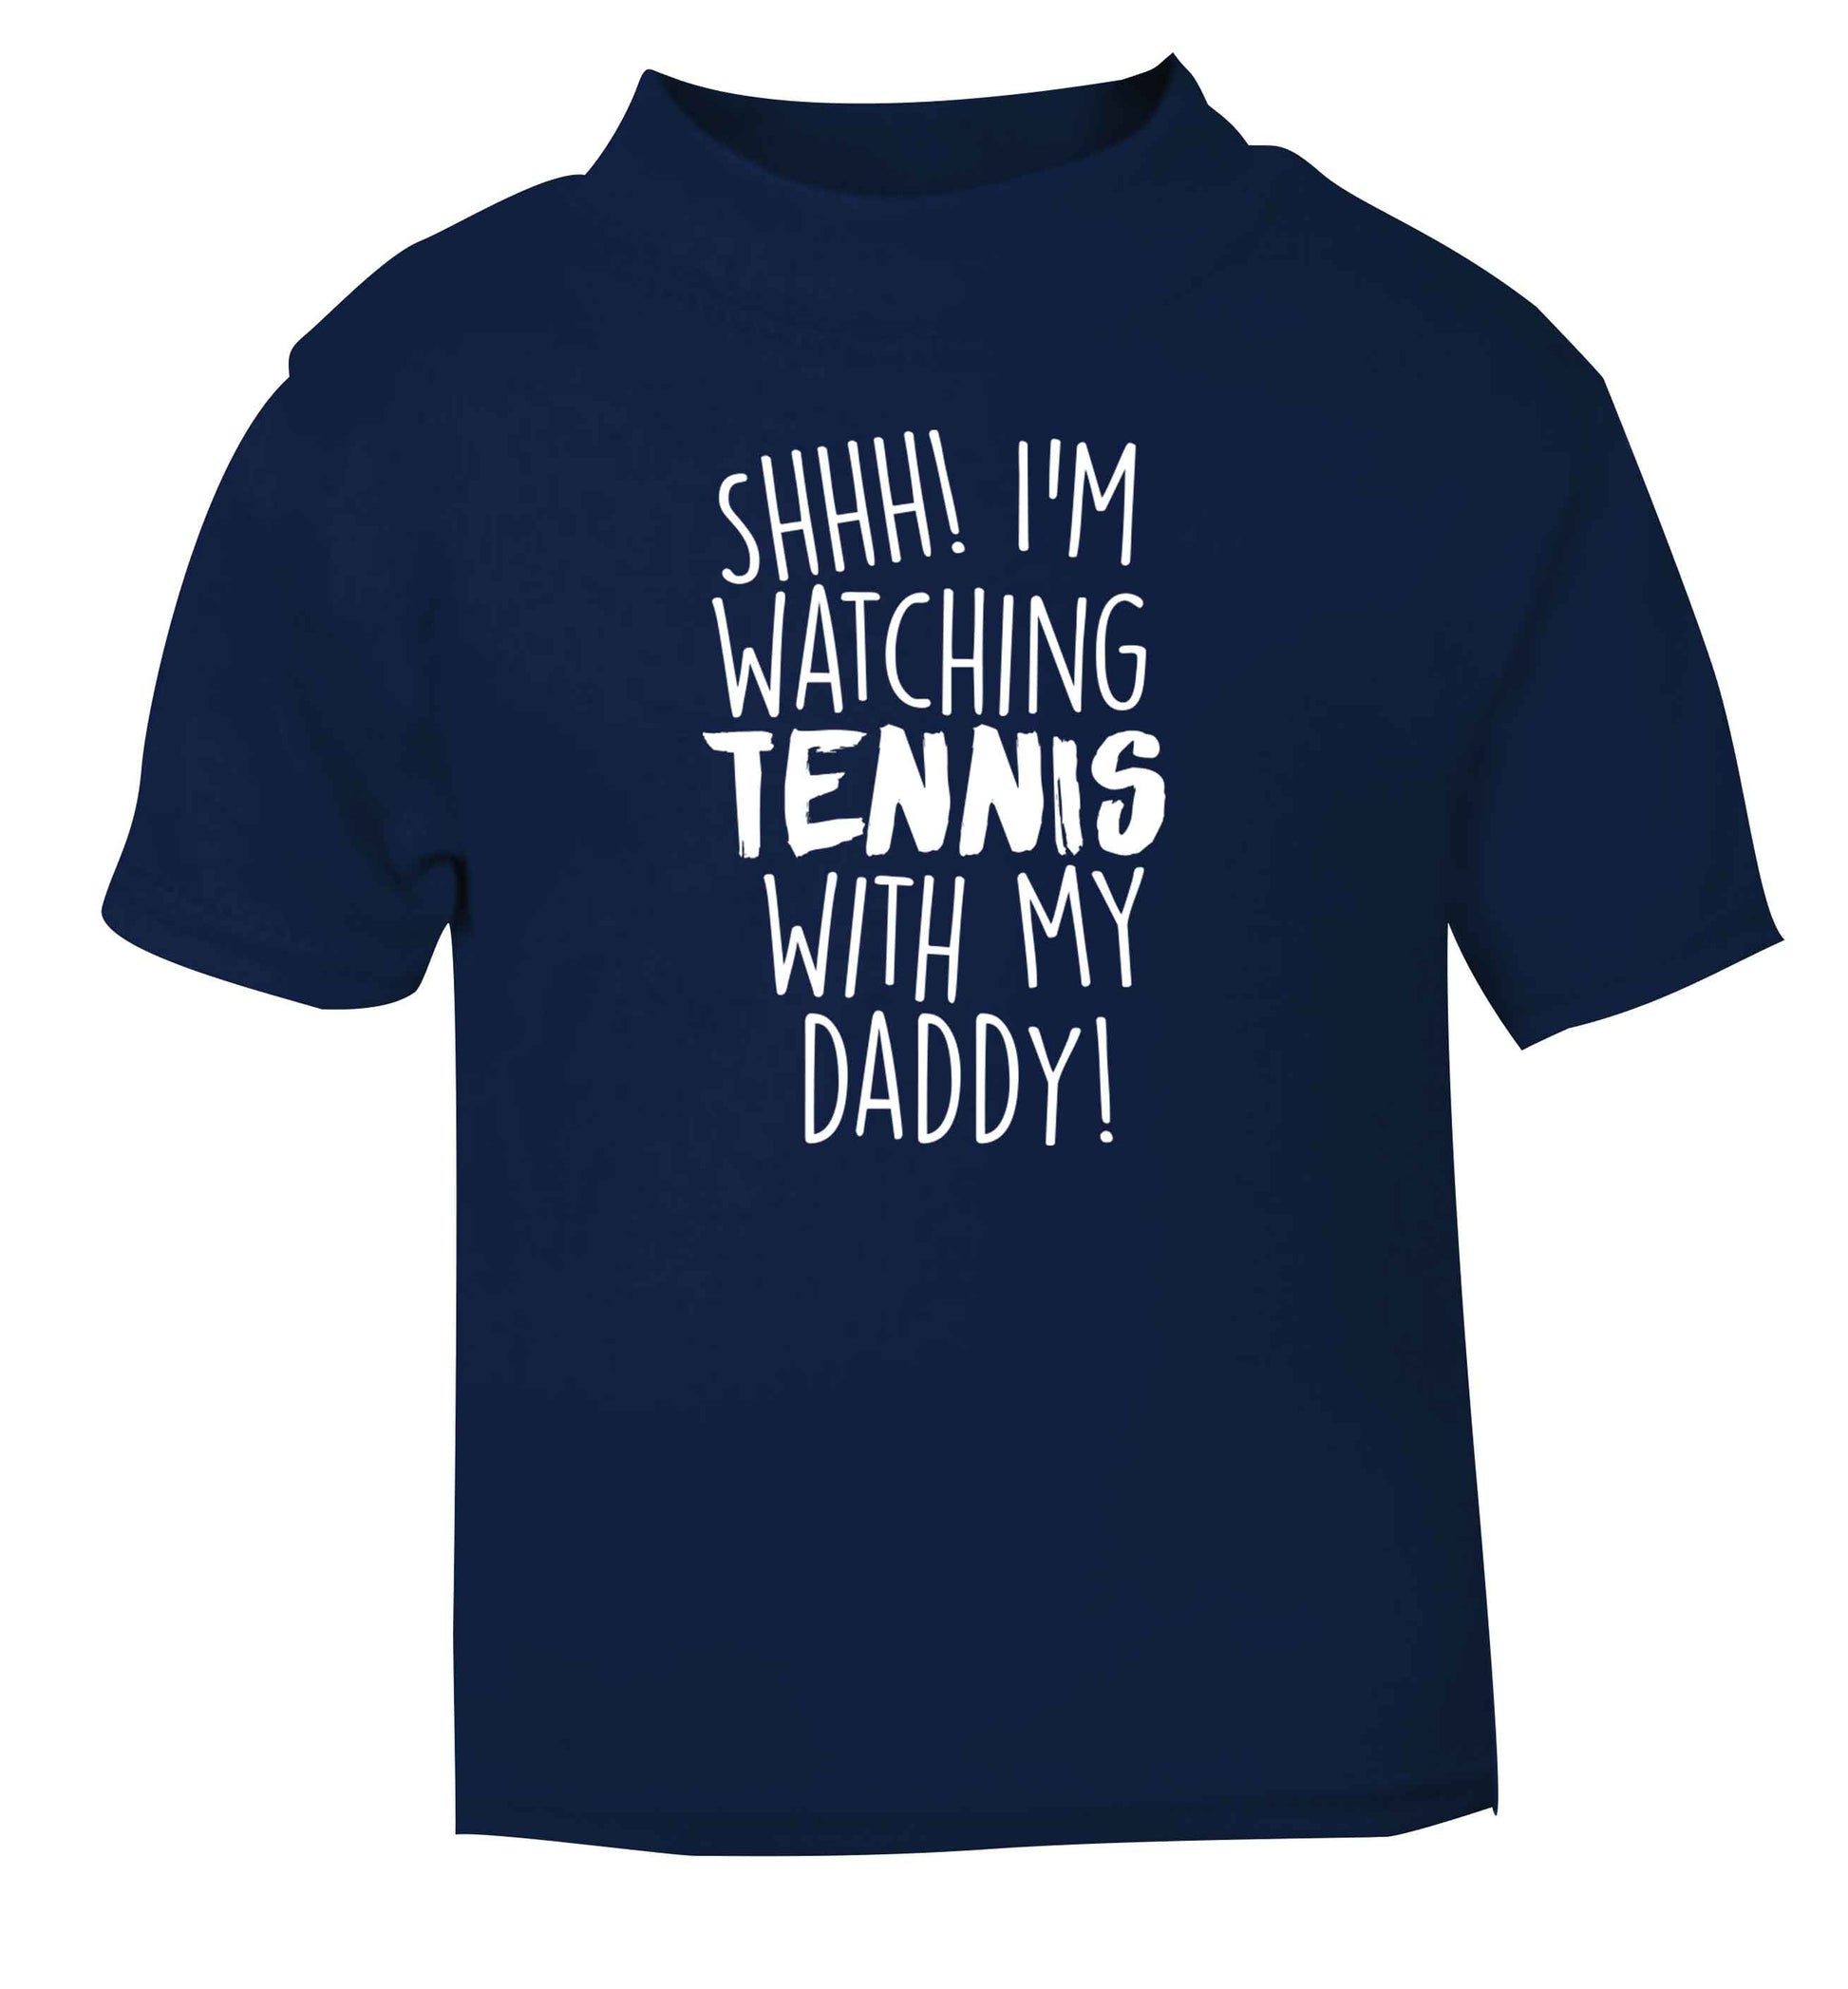 Shh! I'm watching tennis with my daddy! navy Baby Toddler Tshirt 2 Years